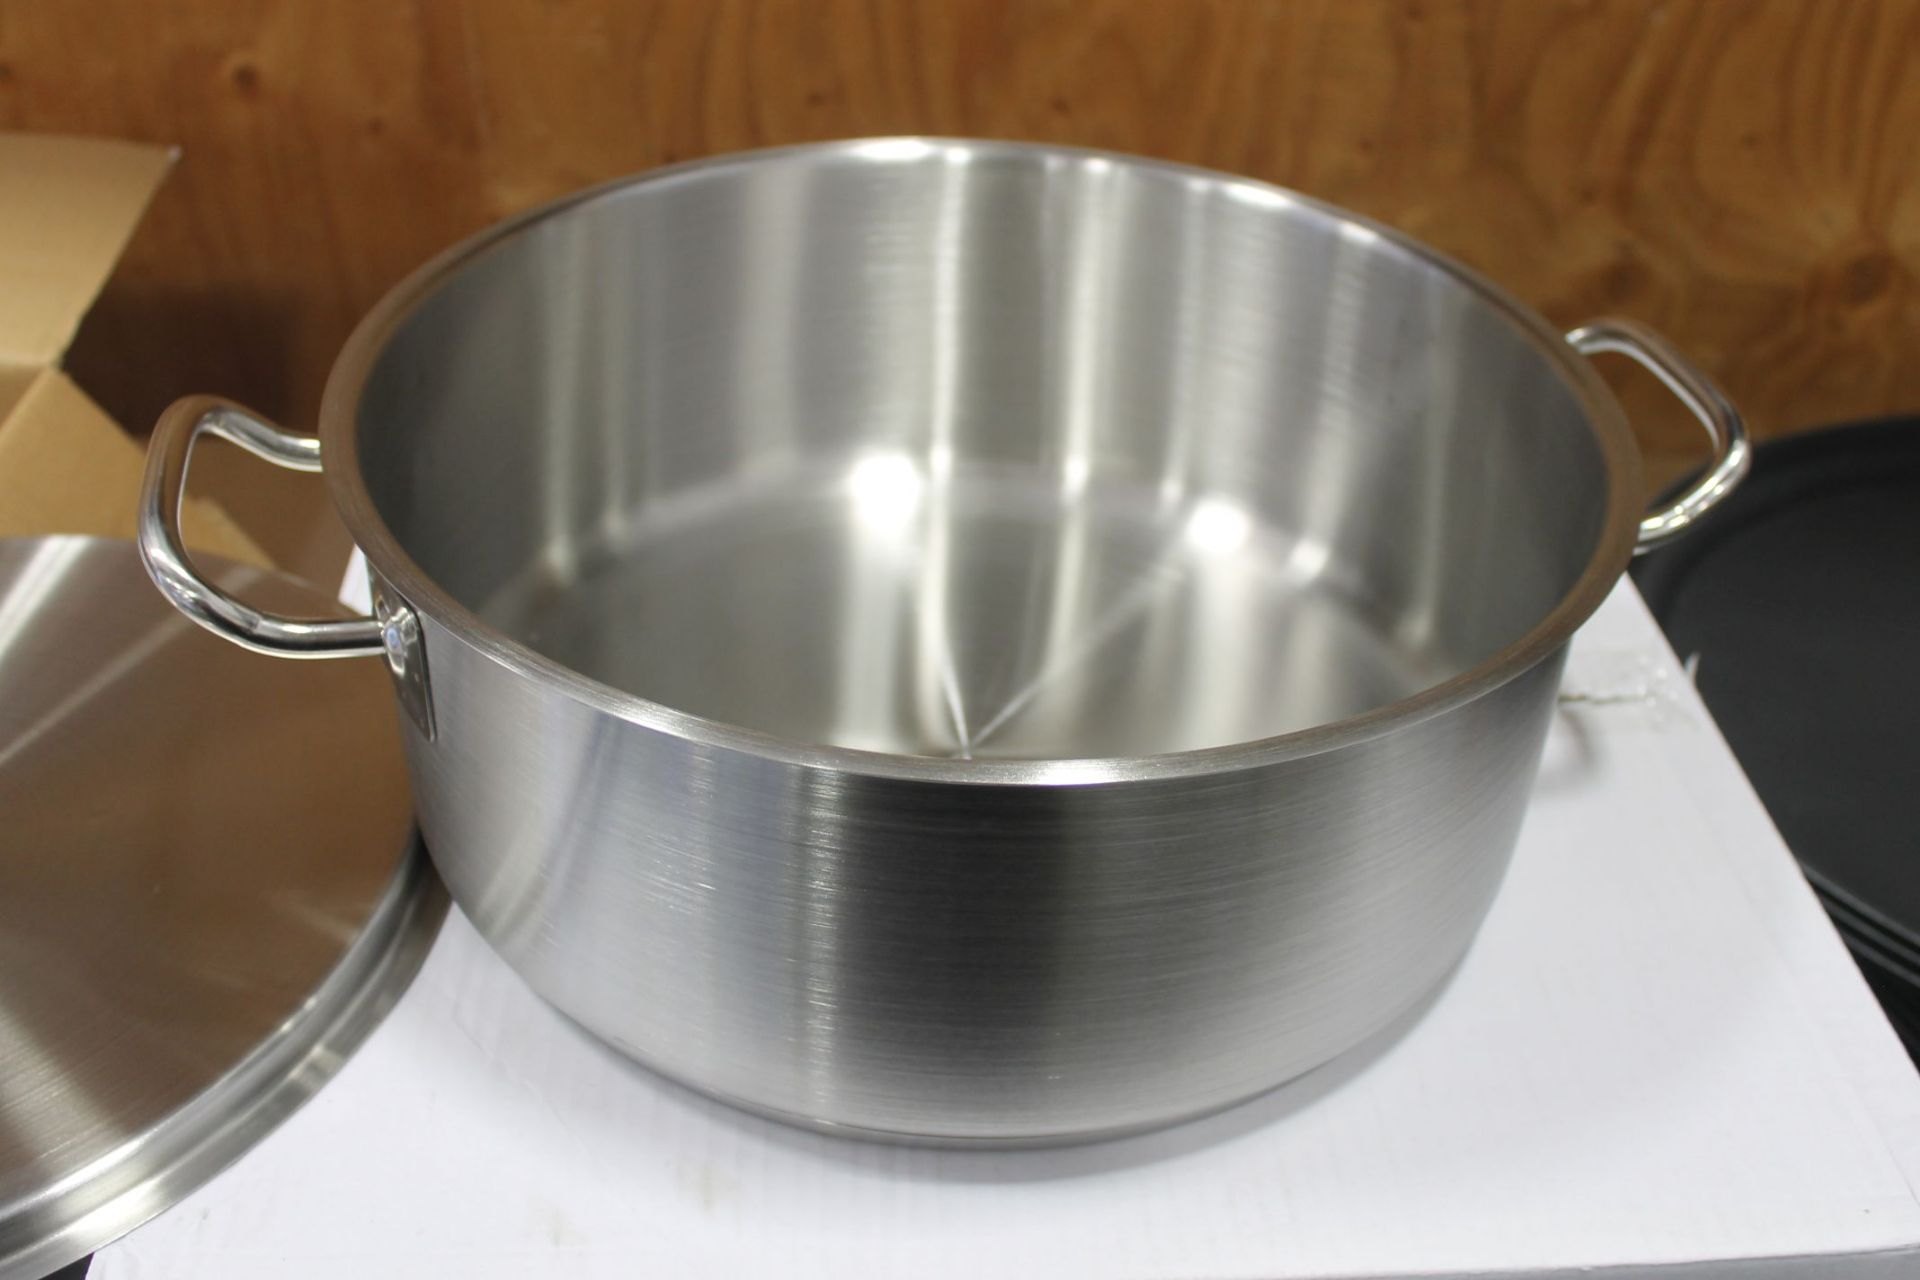 15qt Heavy Duty Stainless Steel Brazier induction capable - Image 2 of 3